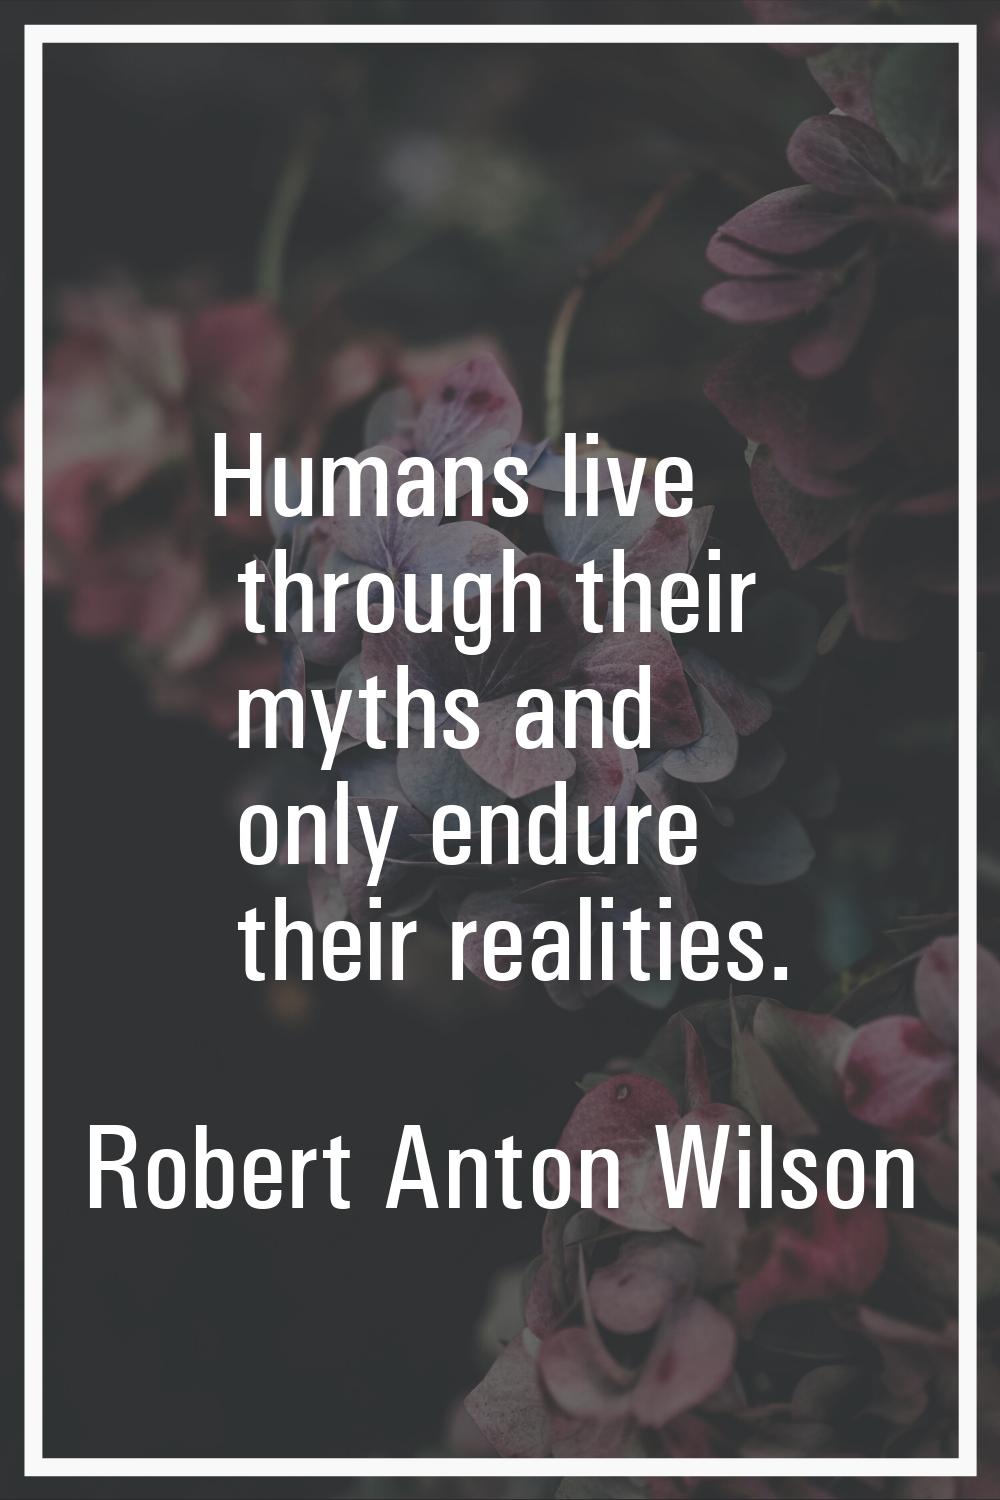 Humans live through their myths and only endure their realities.